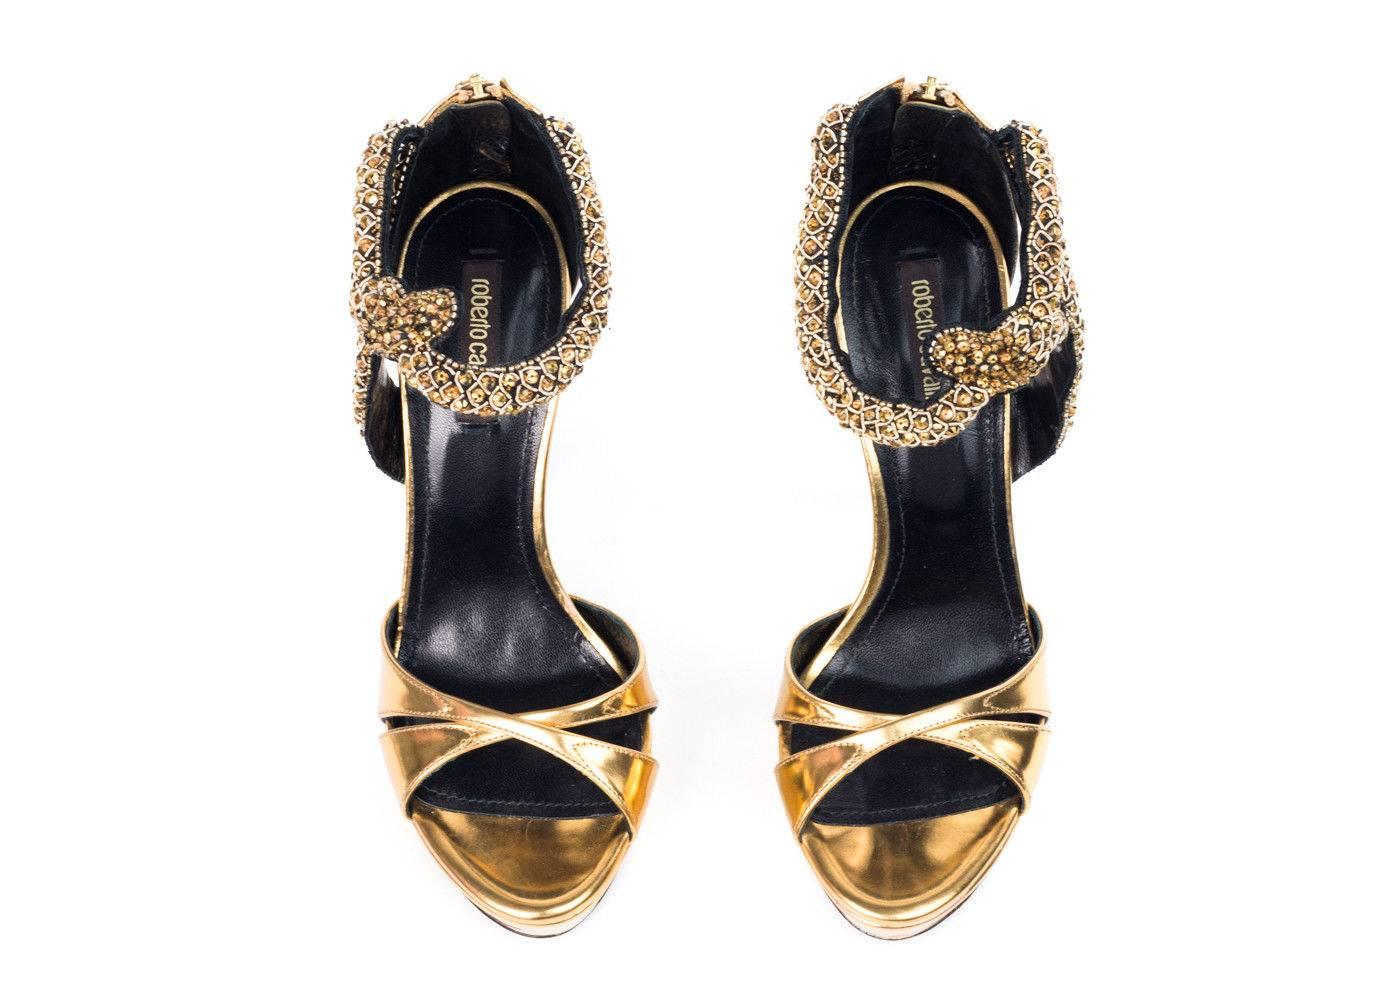 Roberto Cavalli's luxurious gold sandals feature criss-cross detail in the front, embellished ankle strap, and a gold zipper in the back.  These sandals are perfect for formal and special occasions. Pair them with a white flow dress for Grecian